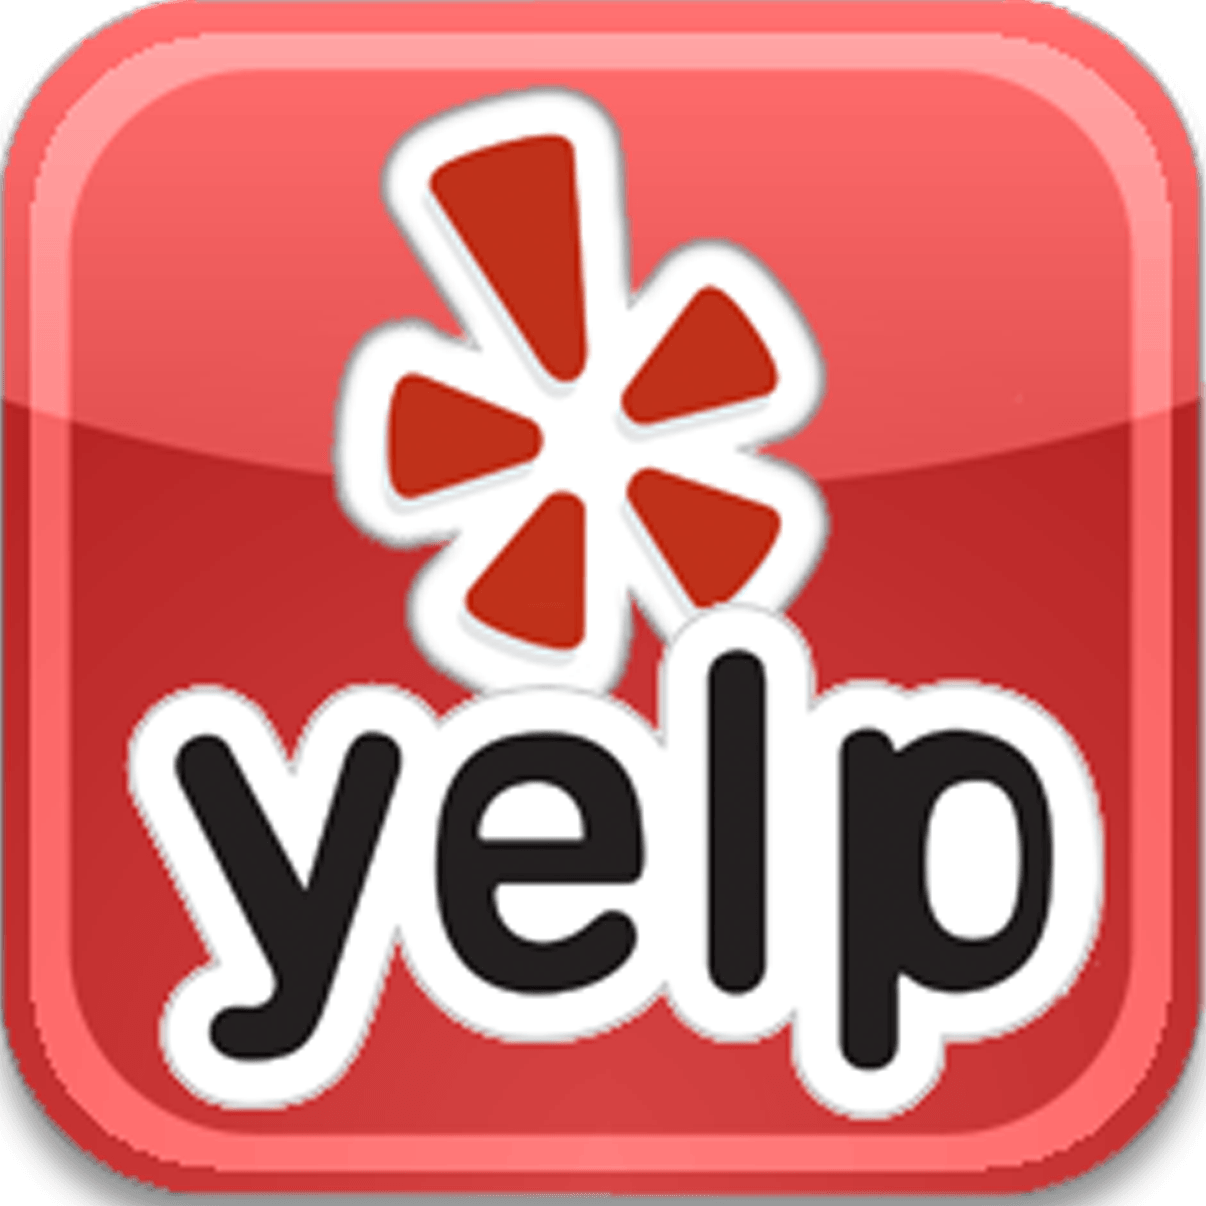 Small Yelp Logo - Small Yelp Button Logo Png Images